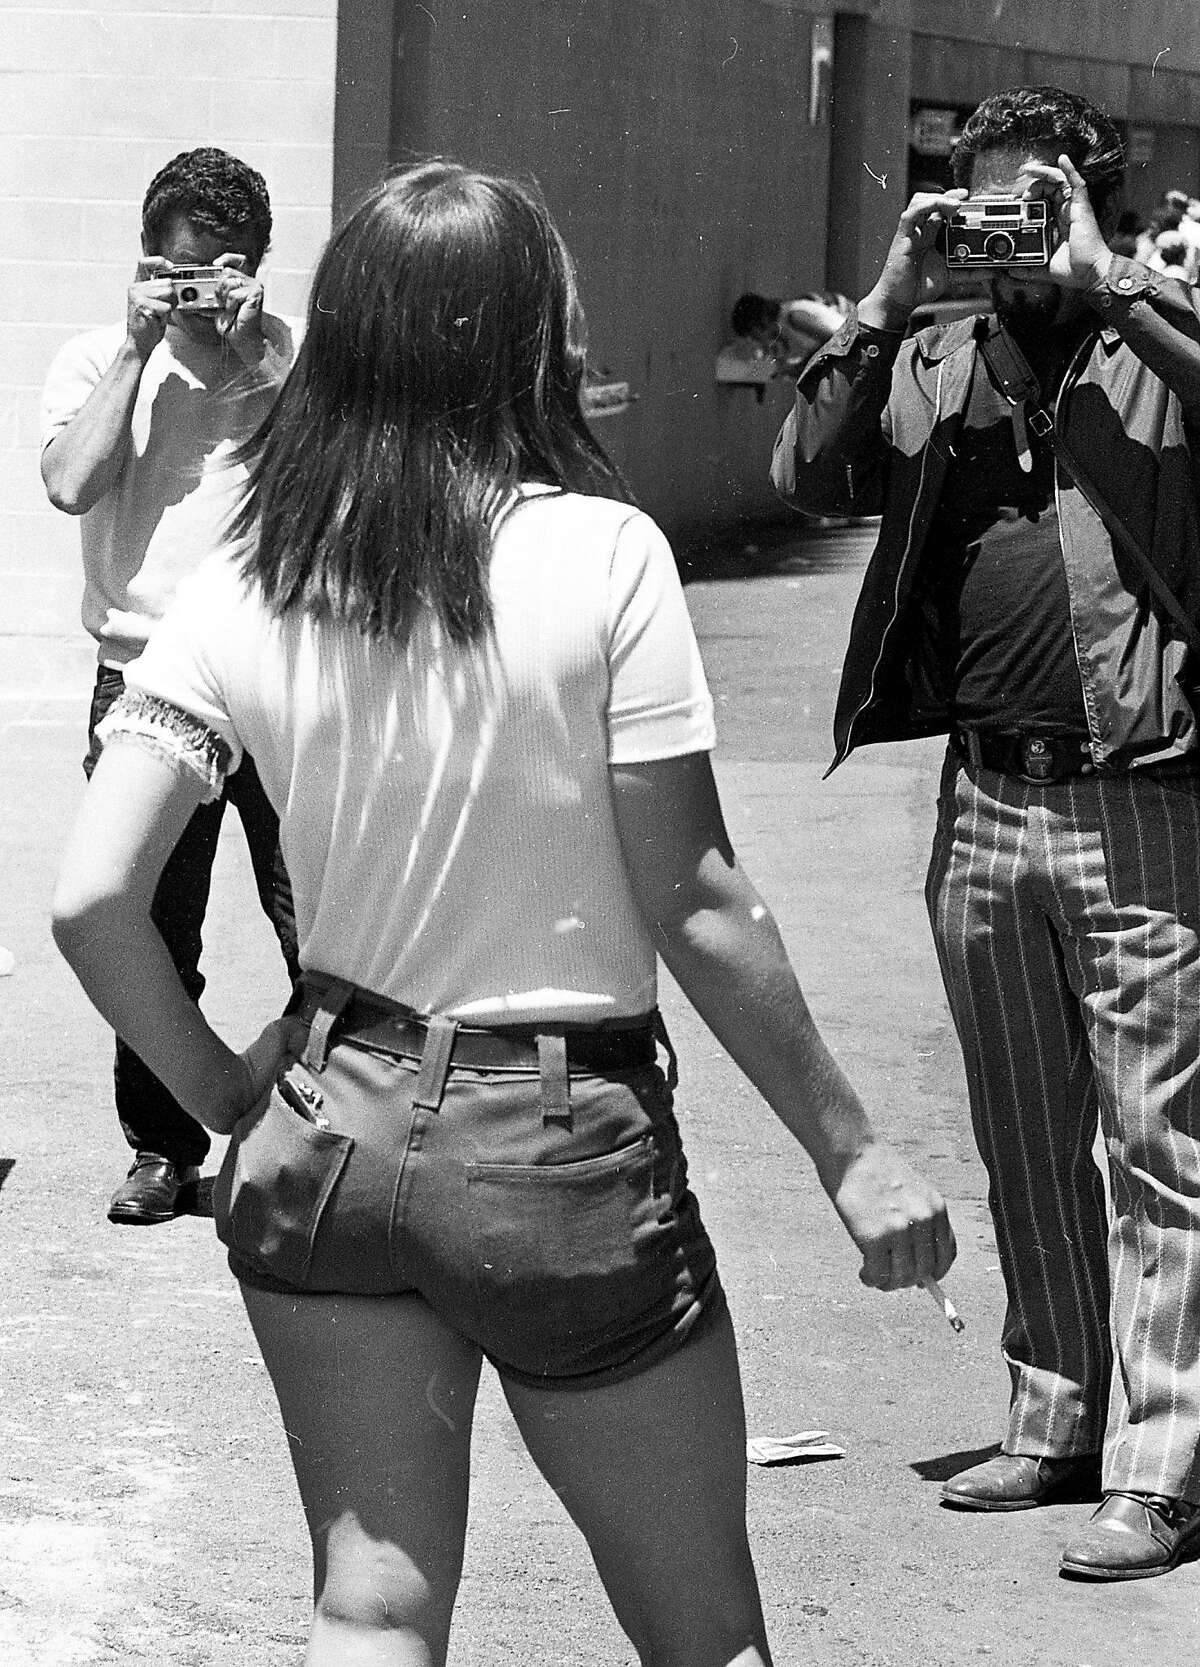 June 27, 1971: Male fans use their free cameras on "Hot Pants Day" at the Oakland Coliseum - a 1971 A's promotion where women in short tight shorts were given free tickets.